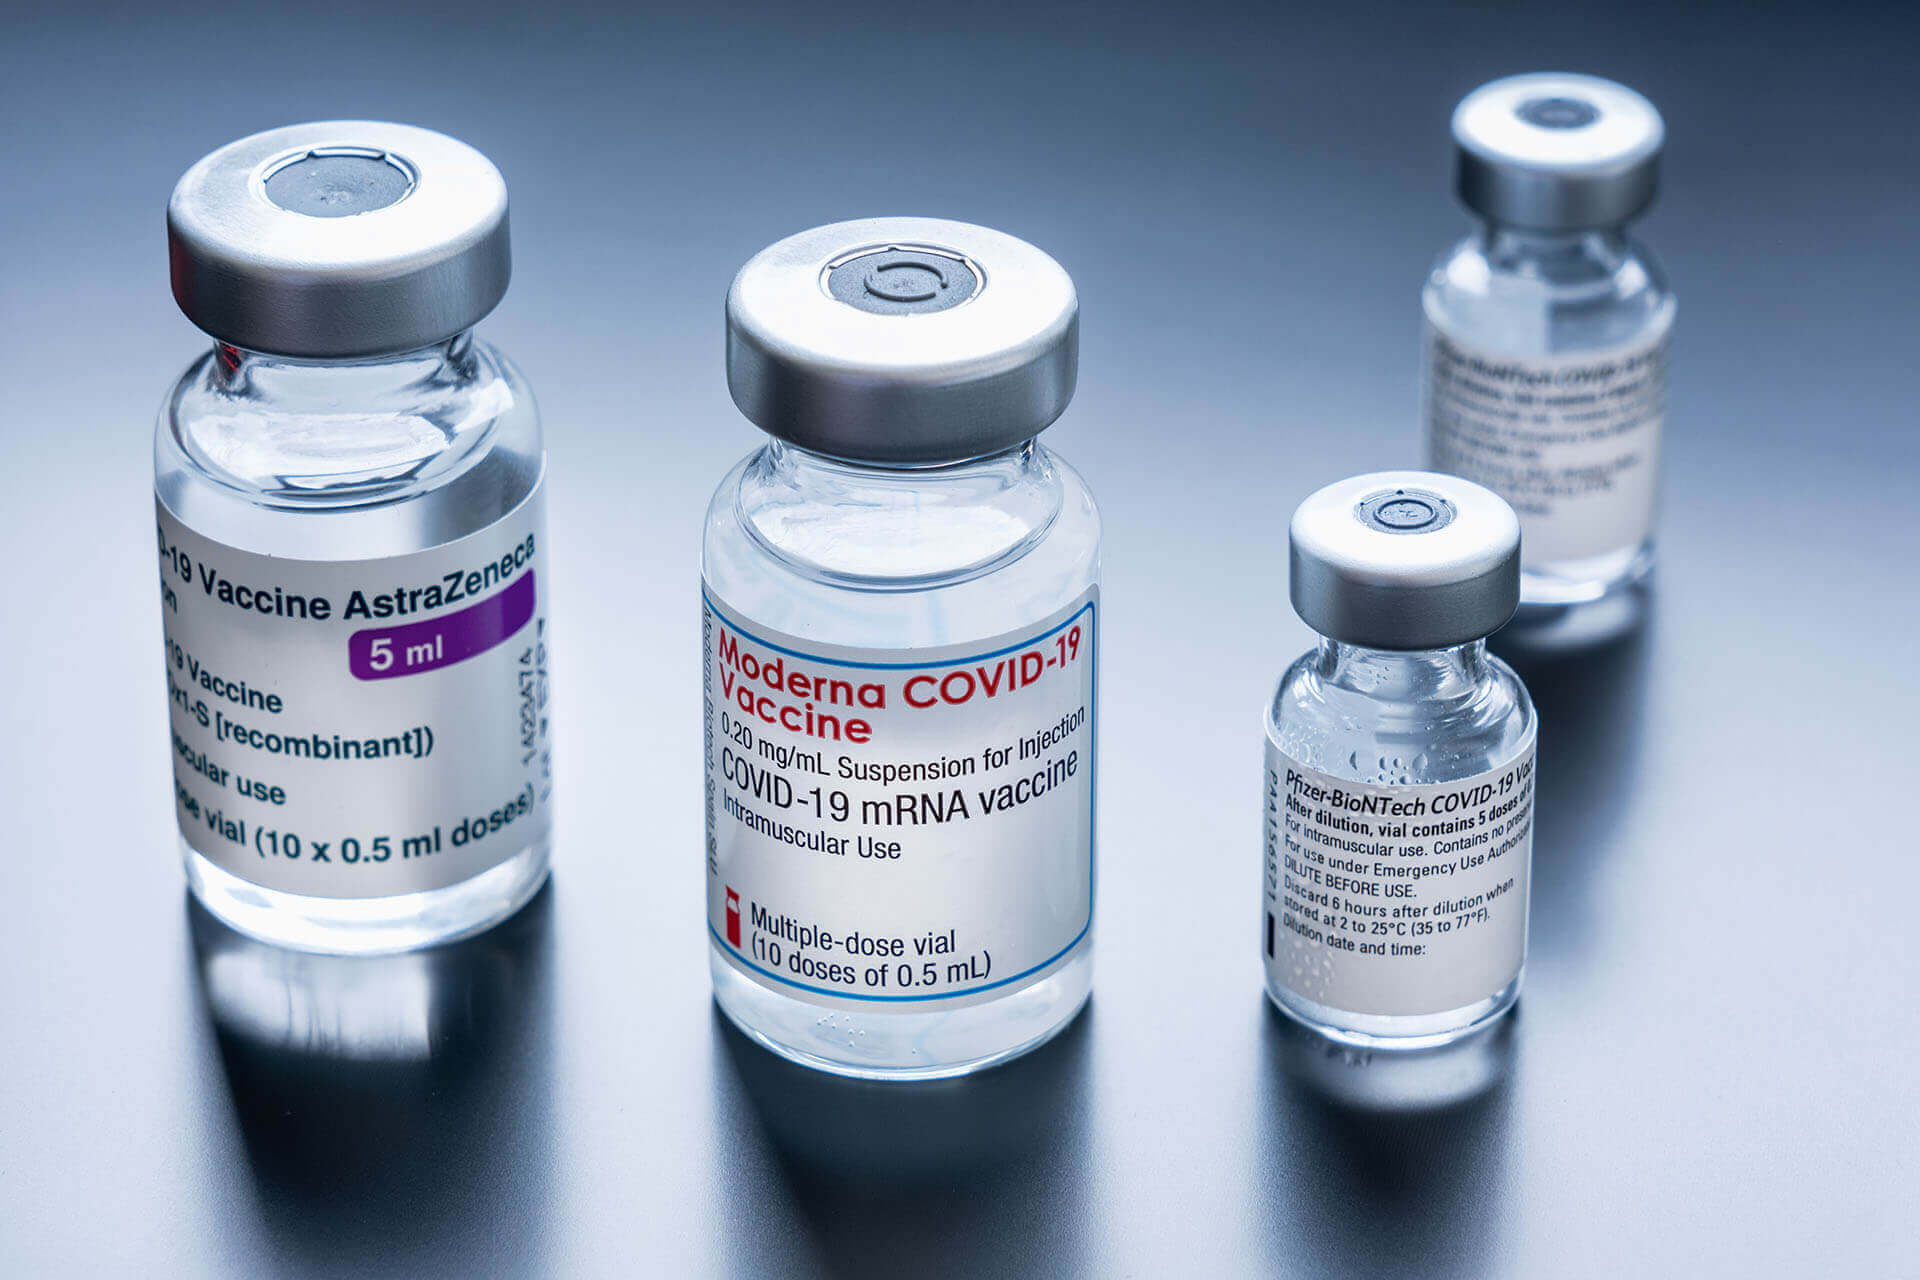 US: DHS Extends COVID-19 Vaccination Requirements for Travelers